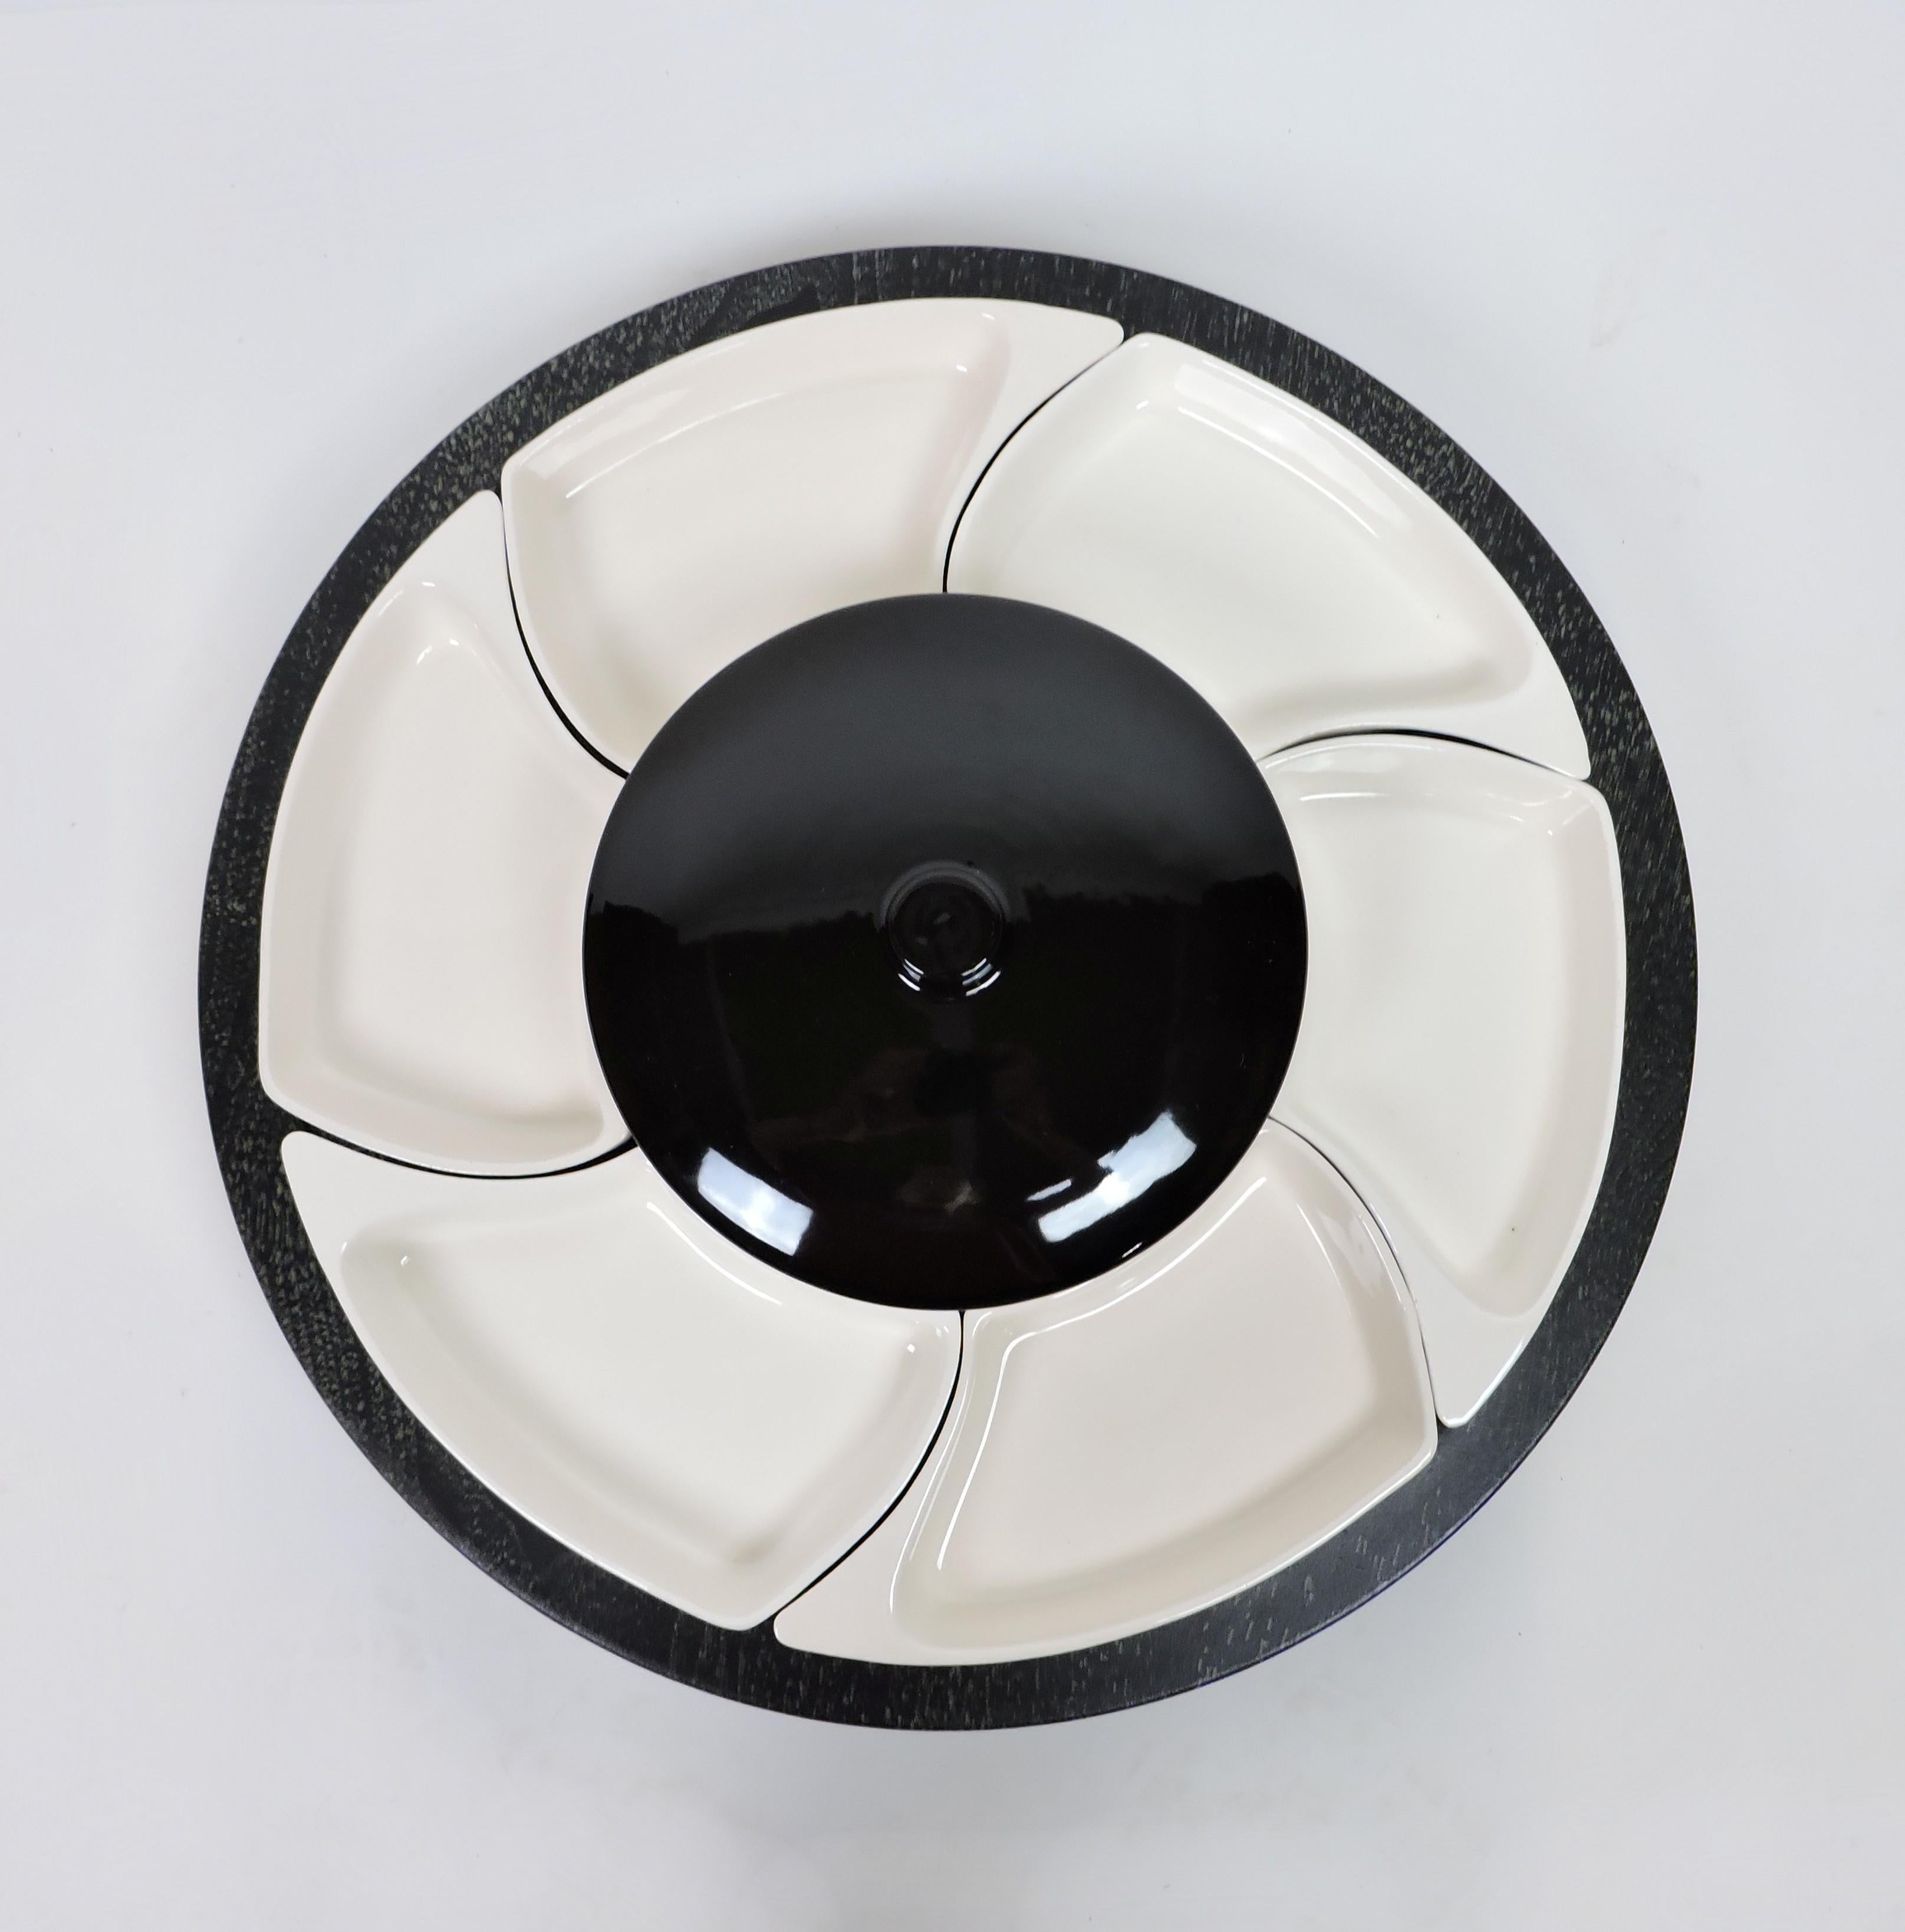 Beautiful and large lazy Susan serving tray by Santa Anita Ware of California. This serving platter has 6 individual side dishes that surround a center bowl with a lid in a striking black and white design that will never go out of style. For added